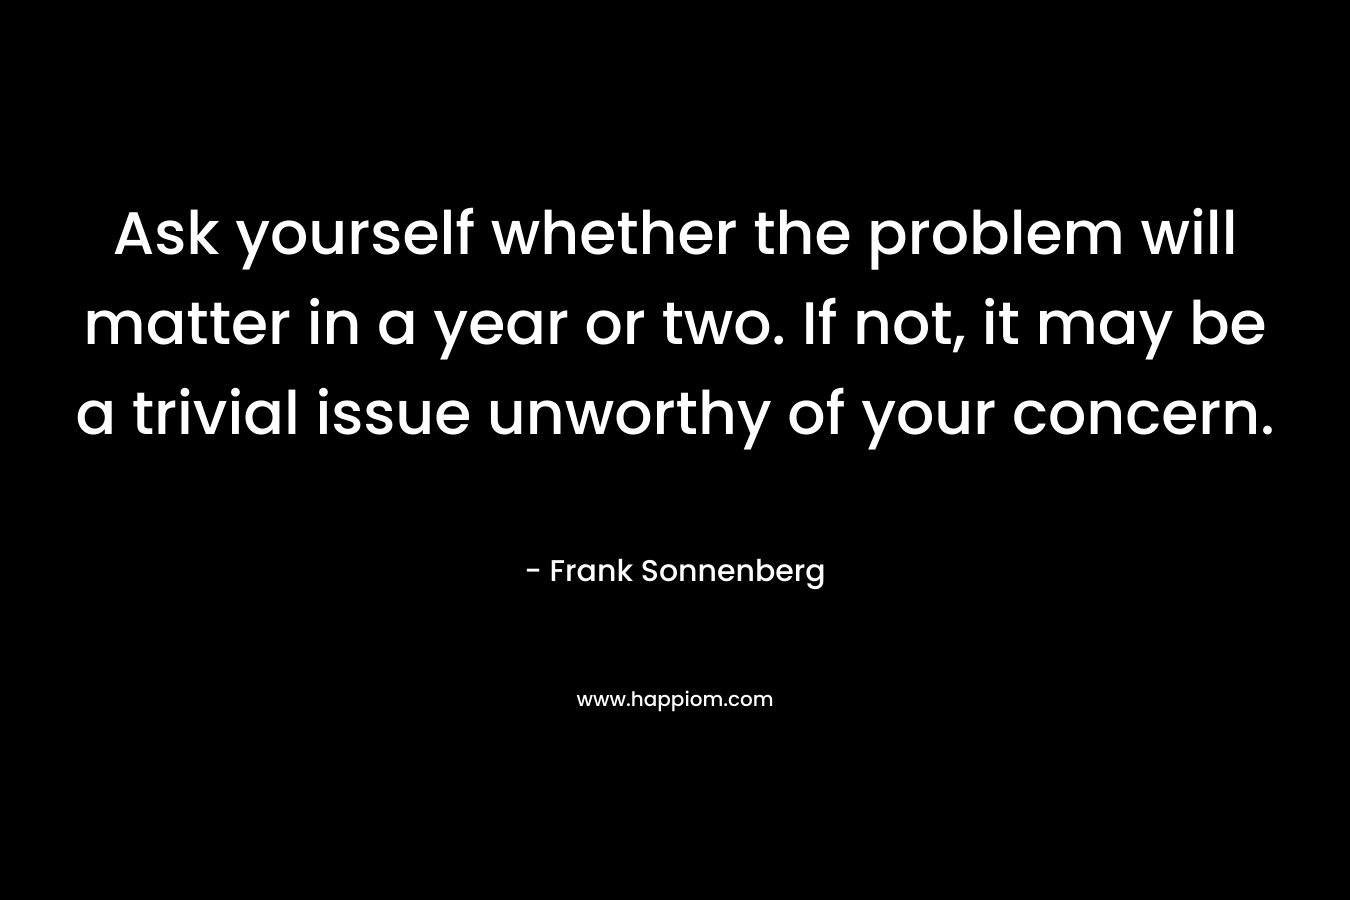 Ask yourself whether the problem will matter in a year or two. If not, it may be a trivial issue unworthy of your concern. – Frank Sonnenberg